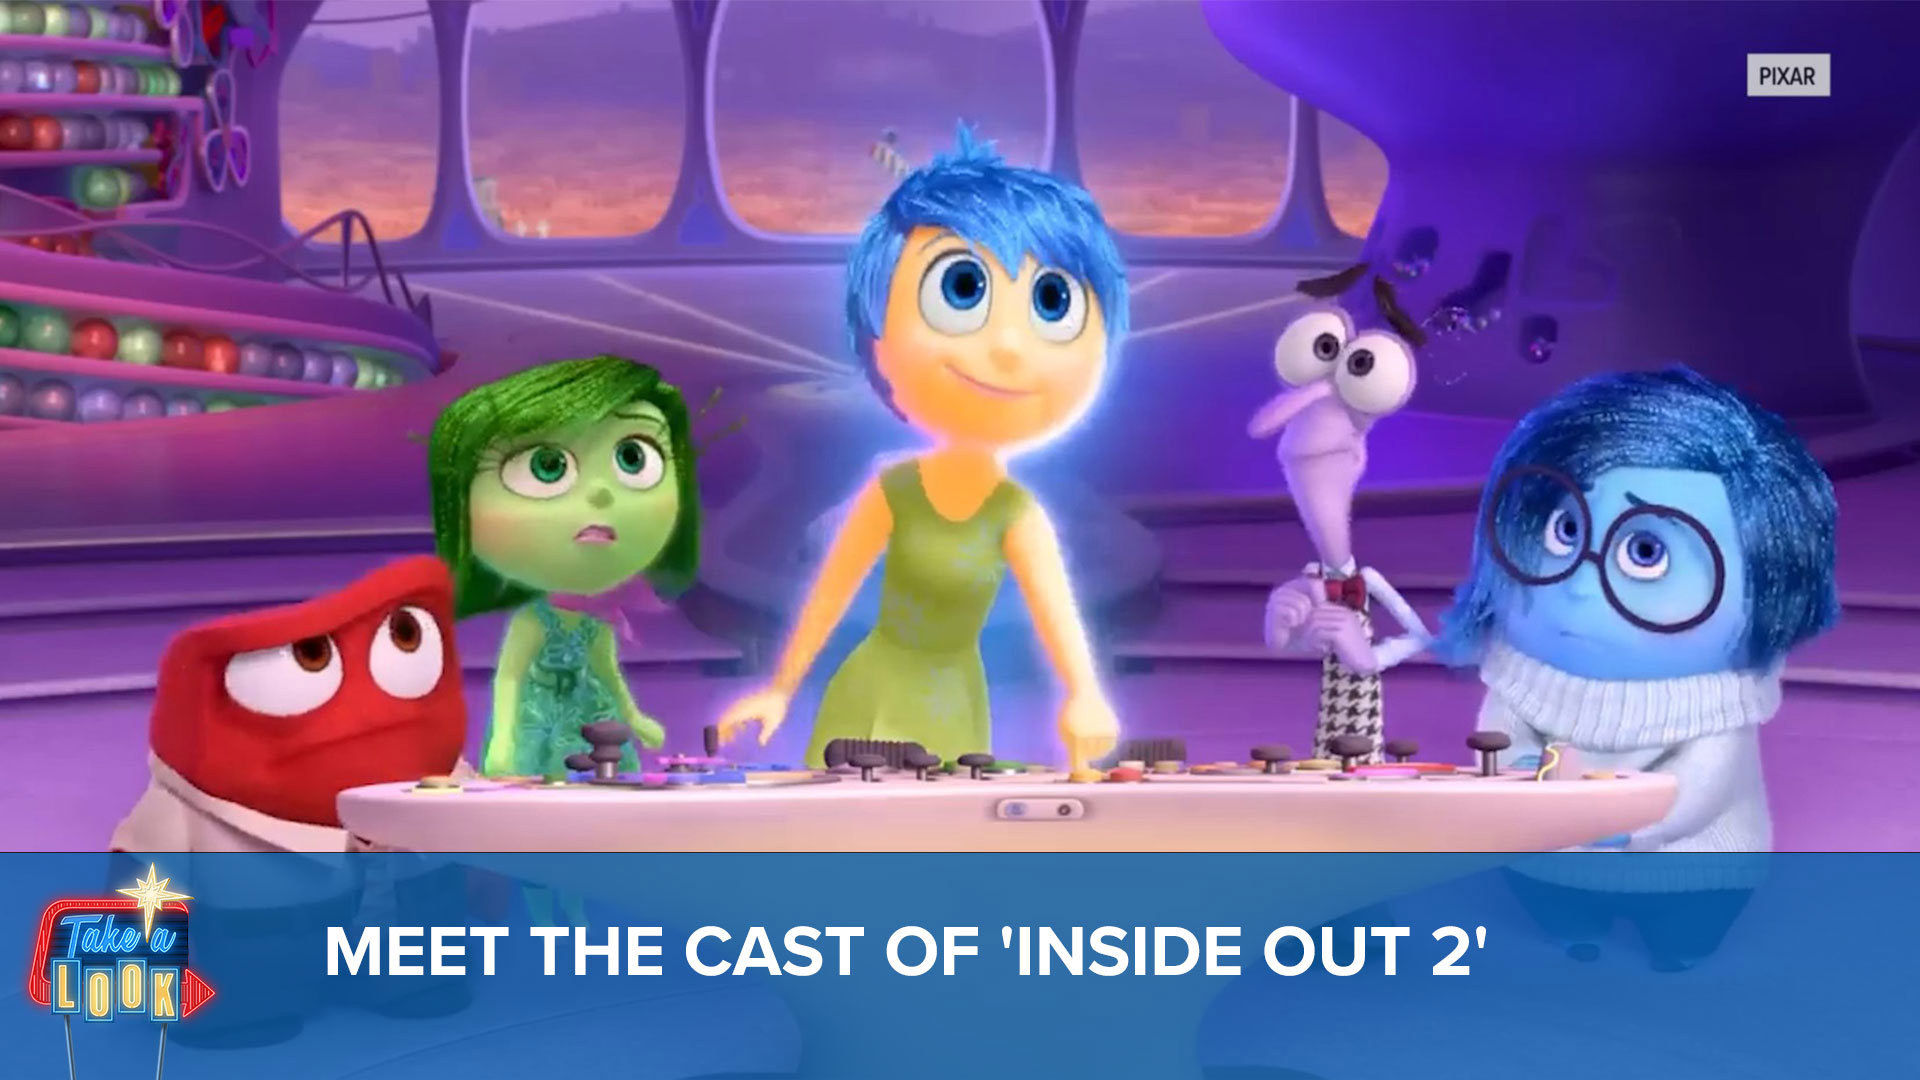 This week on “Take a Look” with Mark S. Allen: Mark catches up with the cast of "Inside Out 2."